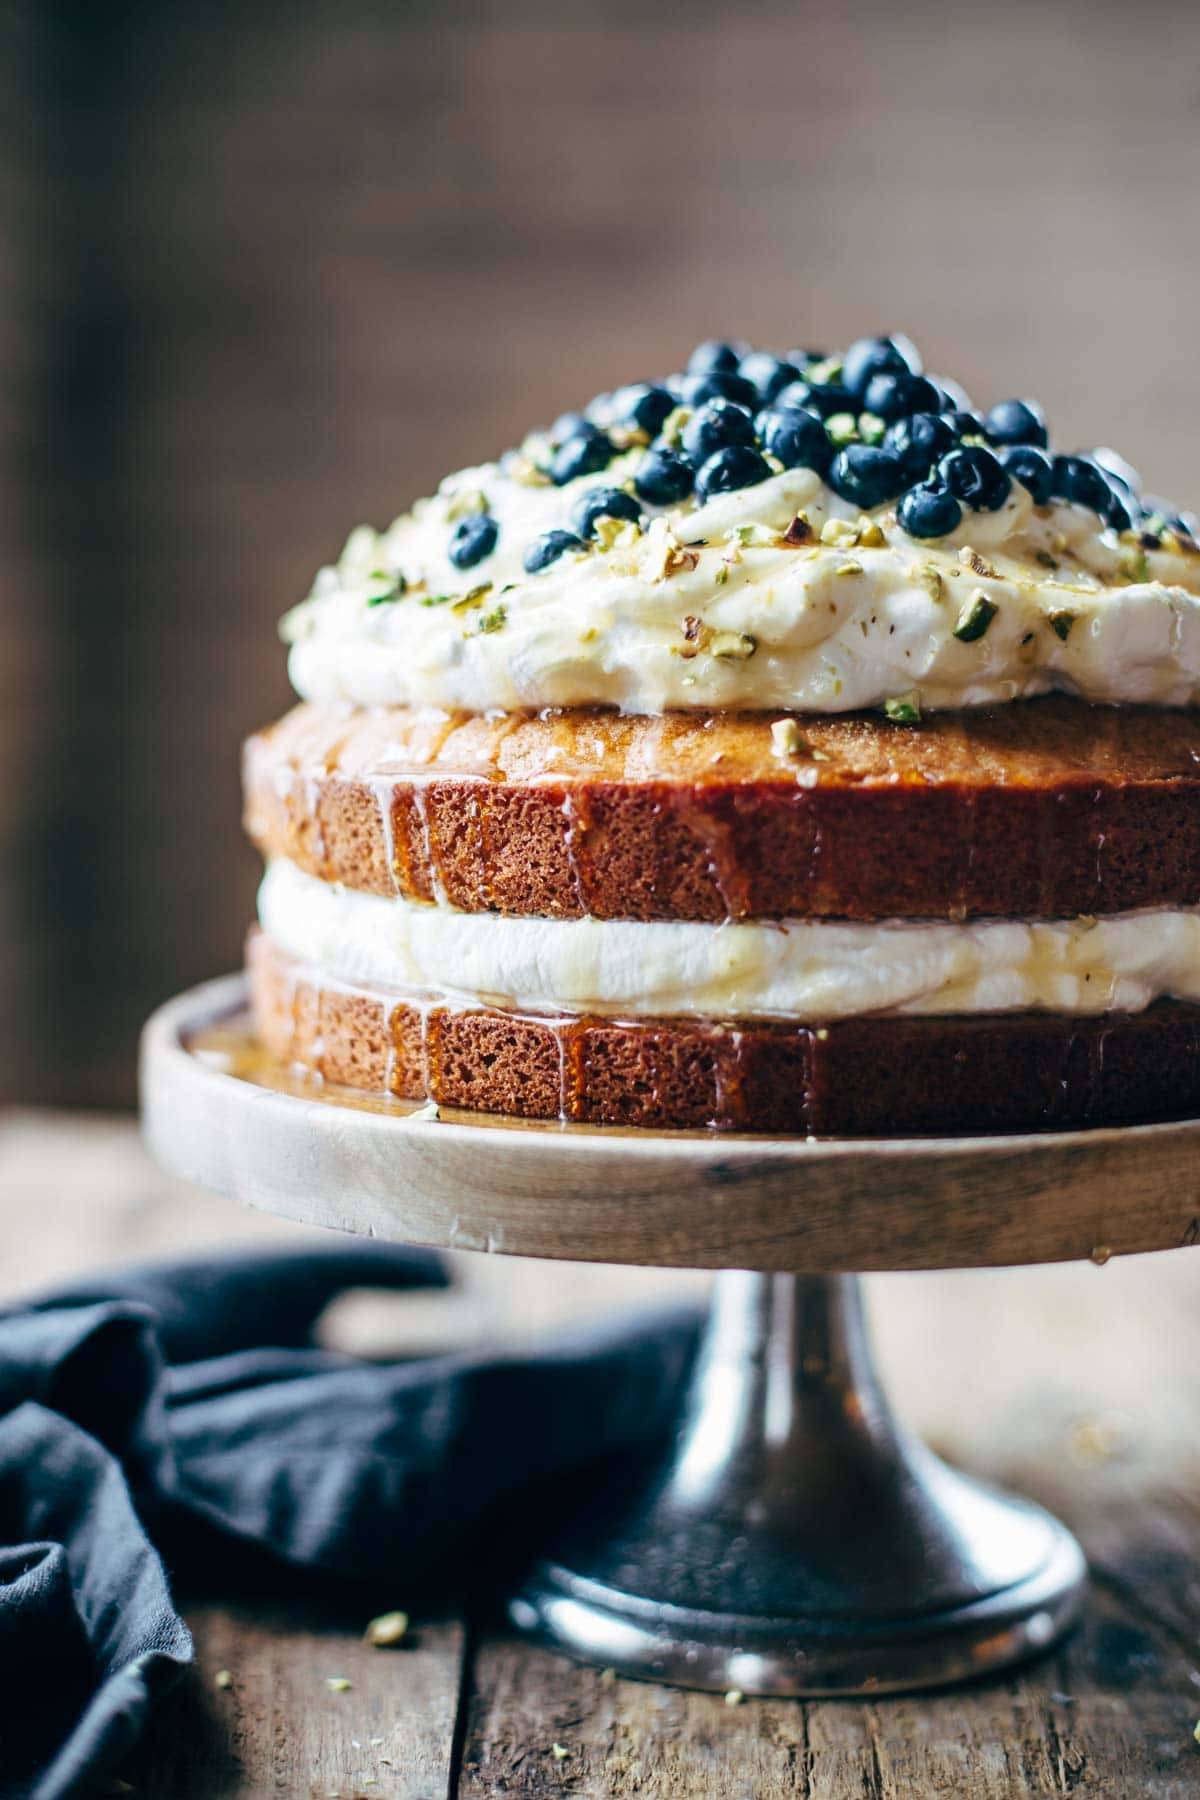 Orange Brunch Cake - SUPER YUMMY because it's made with olive oil and whole oranges! topped with whipped cream and blueberries and you're in fancy brunch business. | pinchofyum.com